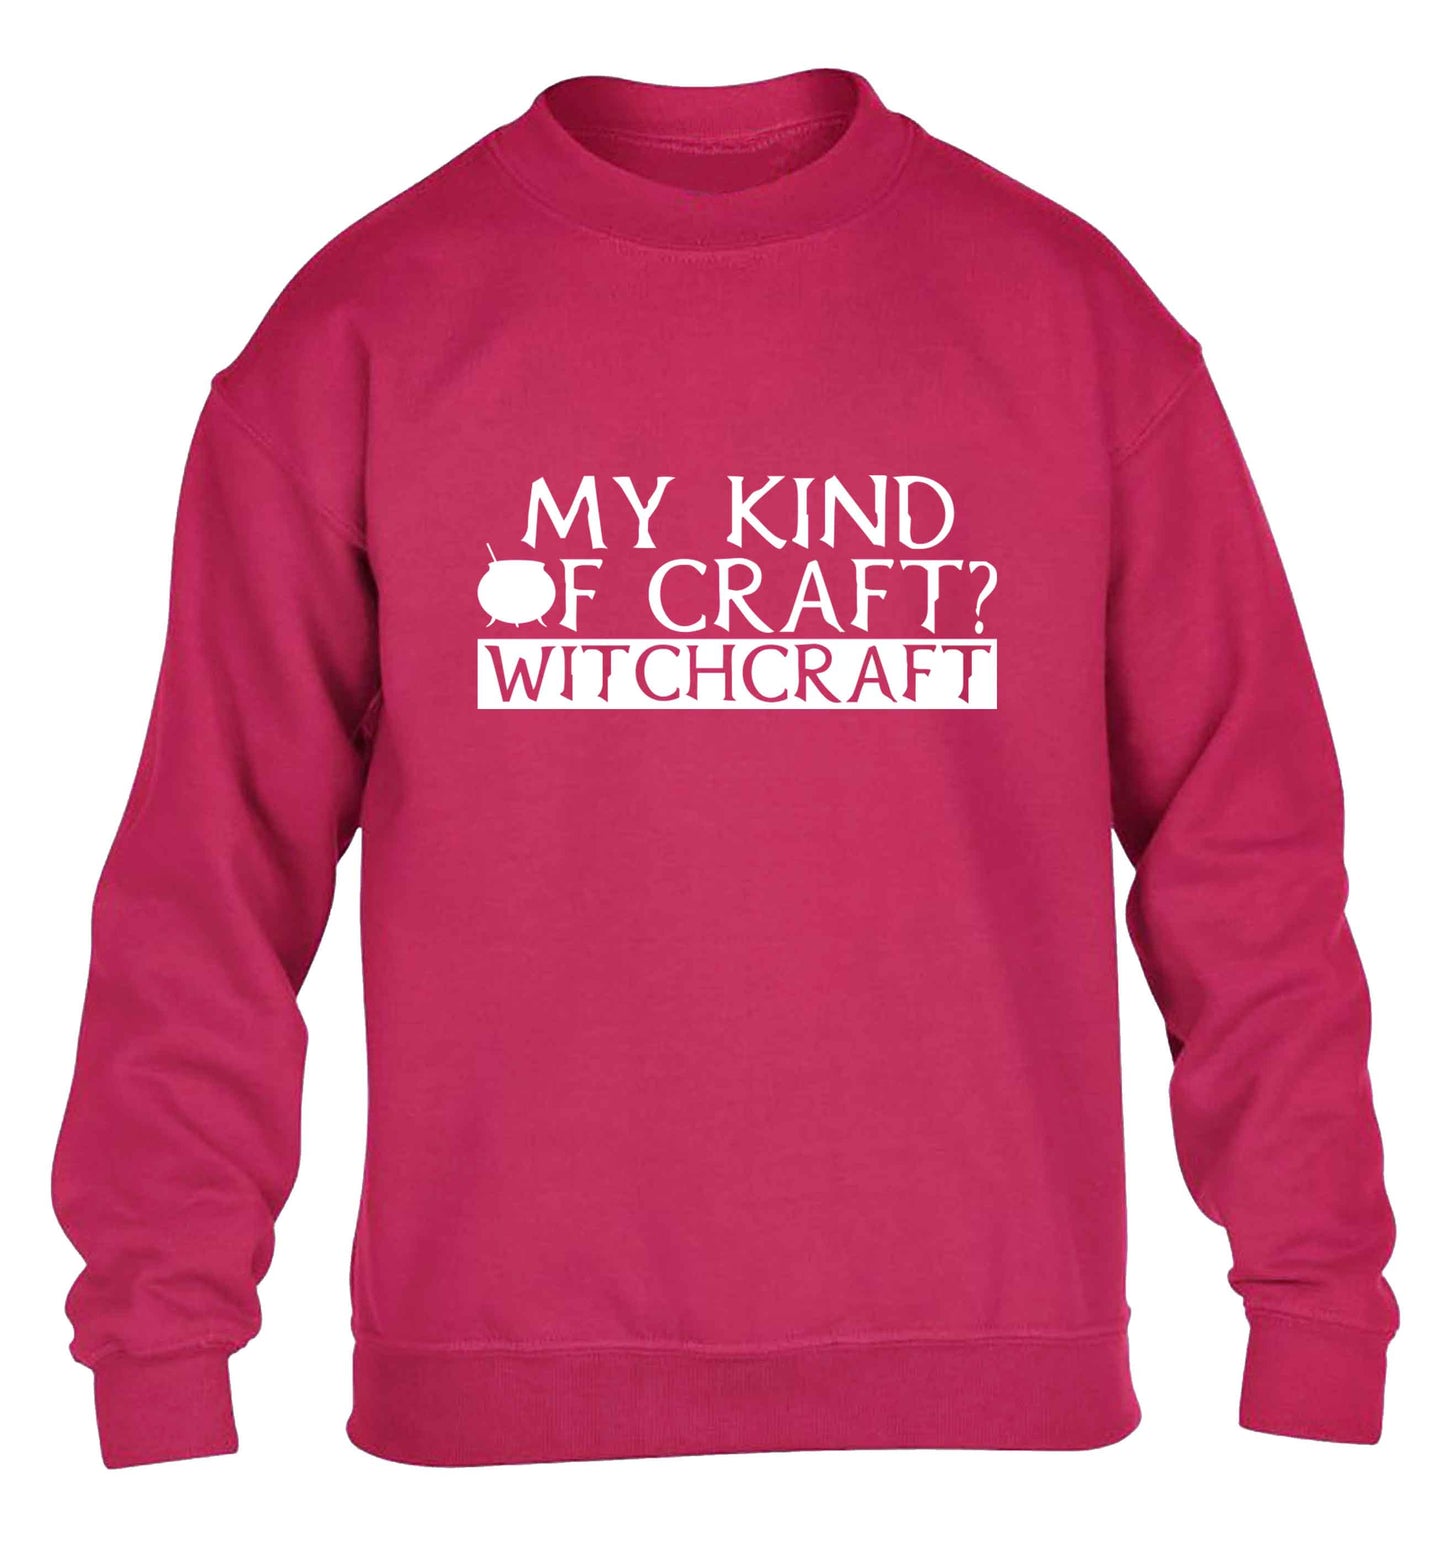 My king of craft? witchcraft  children's pink sweater 12-13 Years